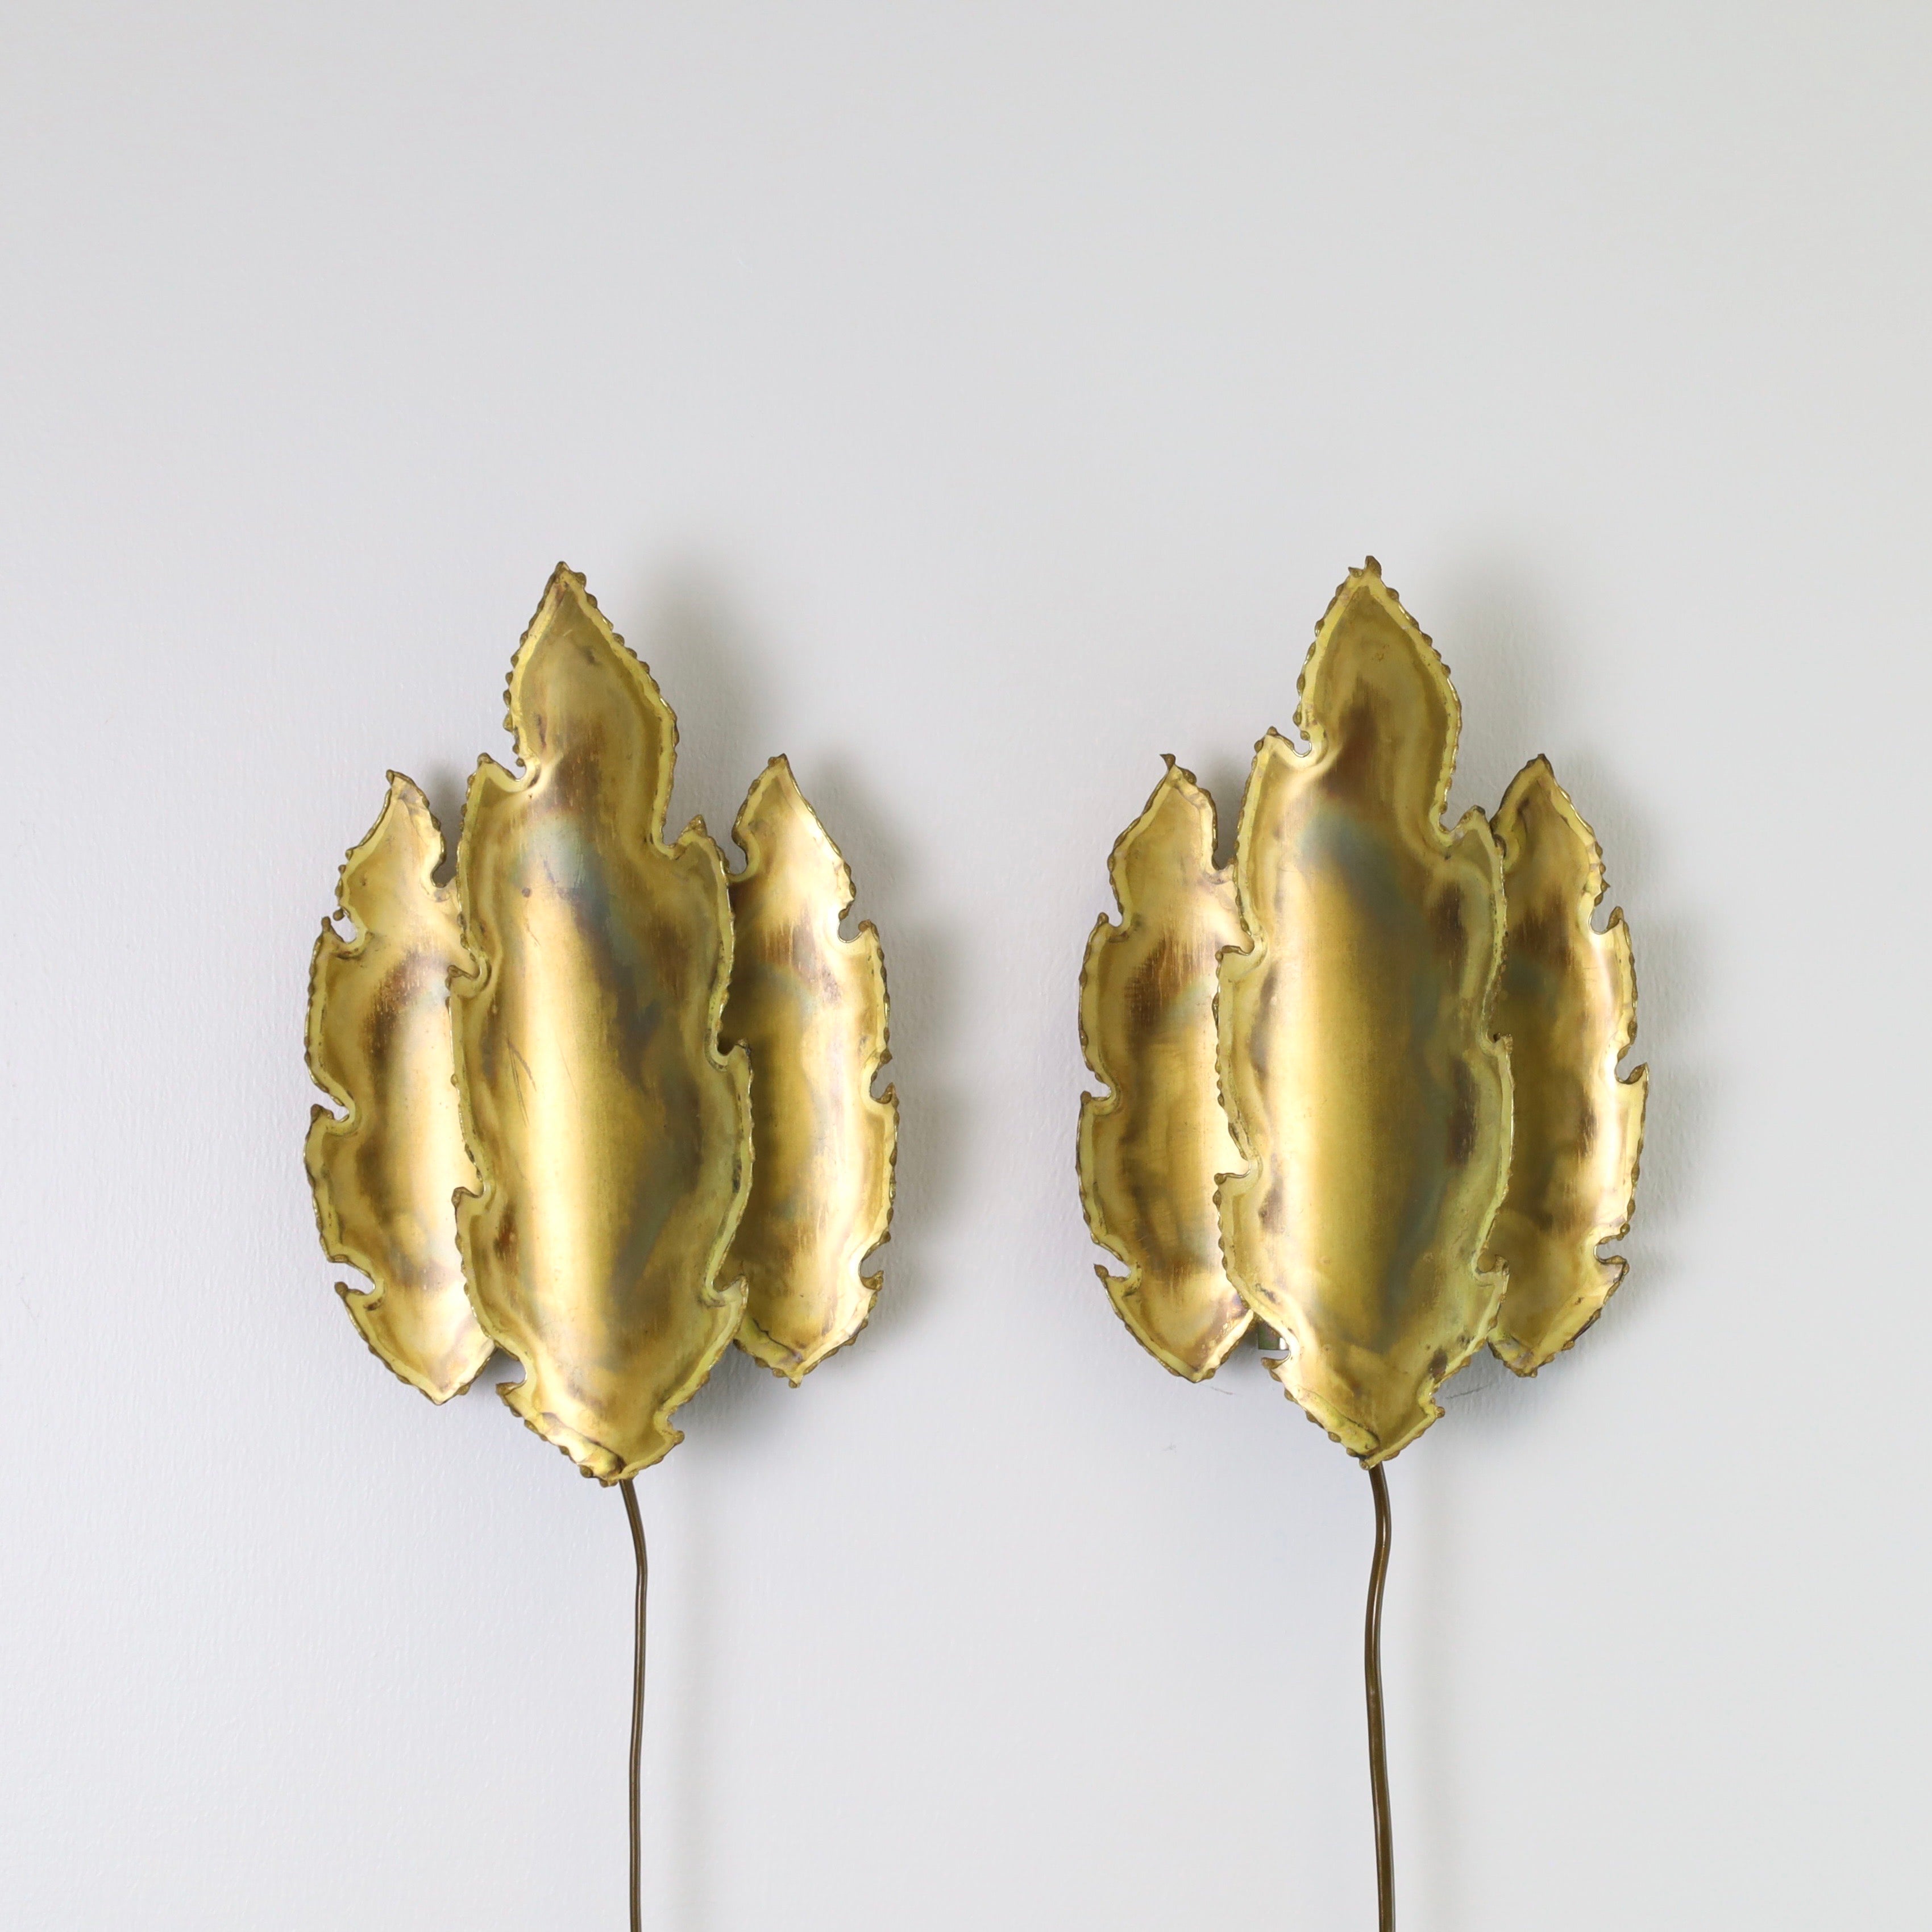 Pair of Leaf-Shaped Brass Wall Lamps by Svend Aage Holm Sorensen, 1960s, Denmark For Sale